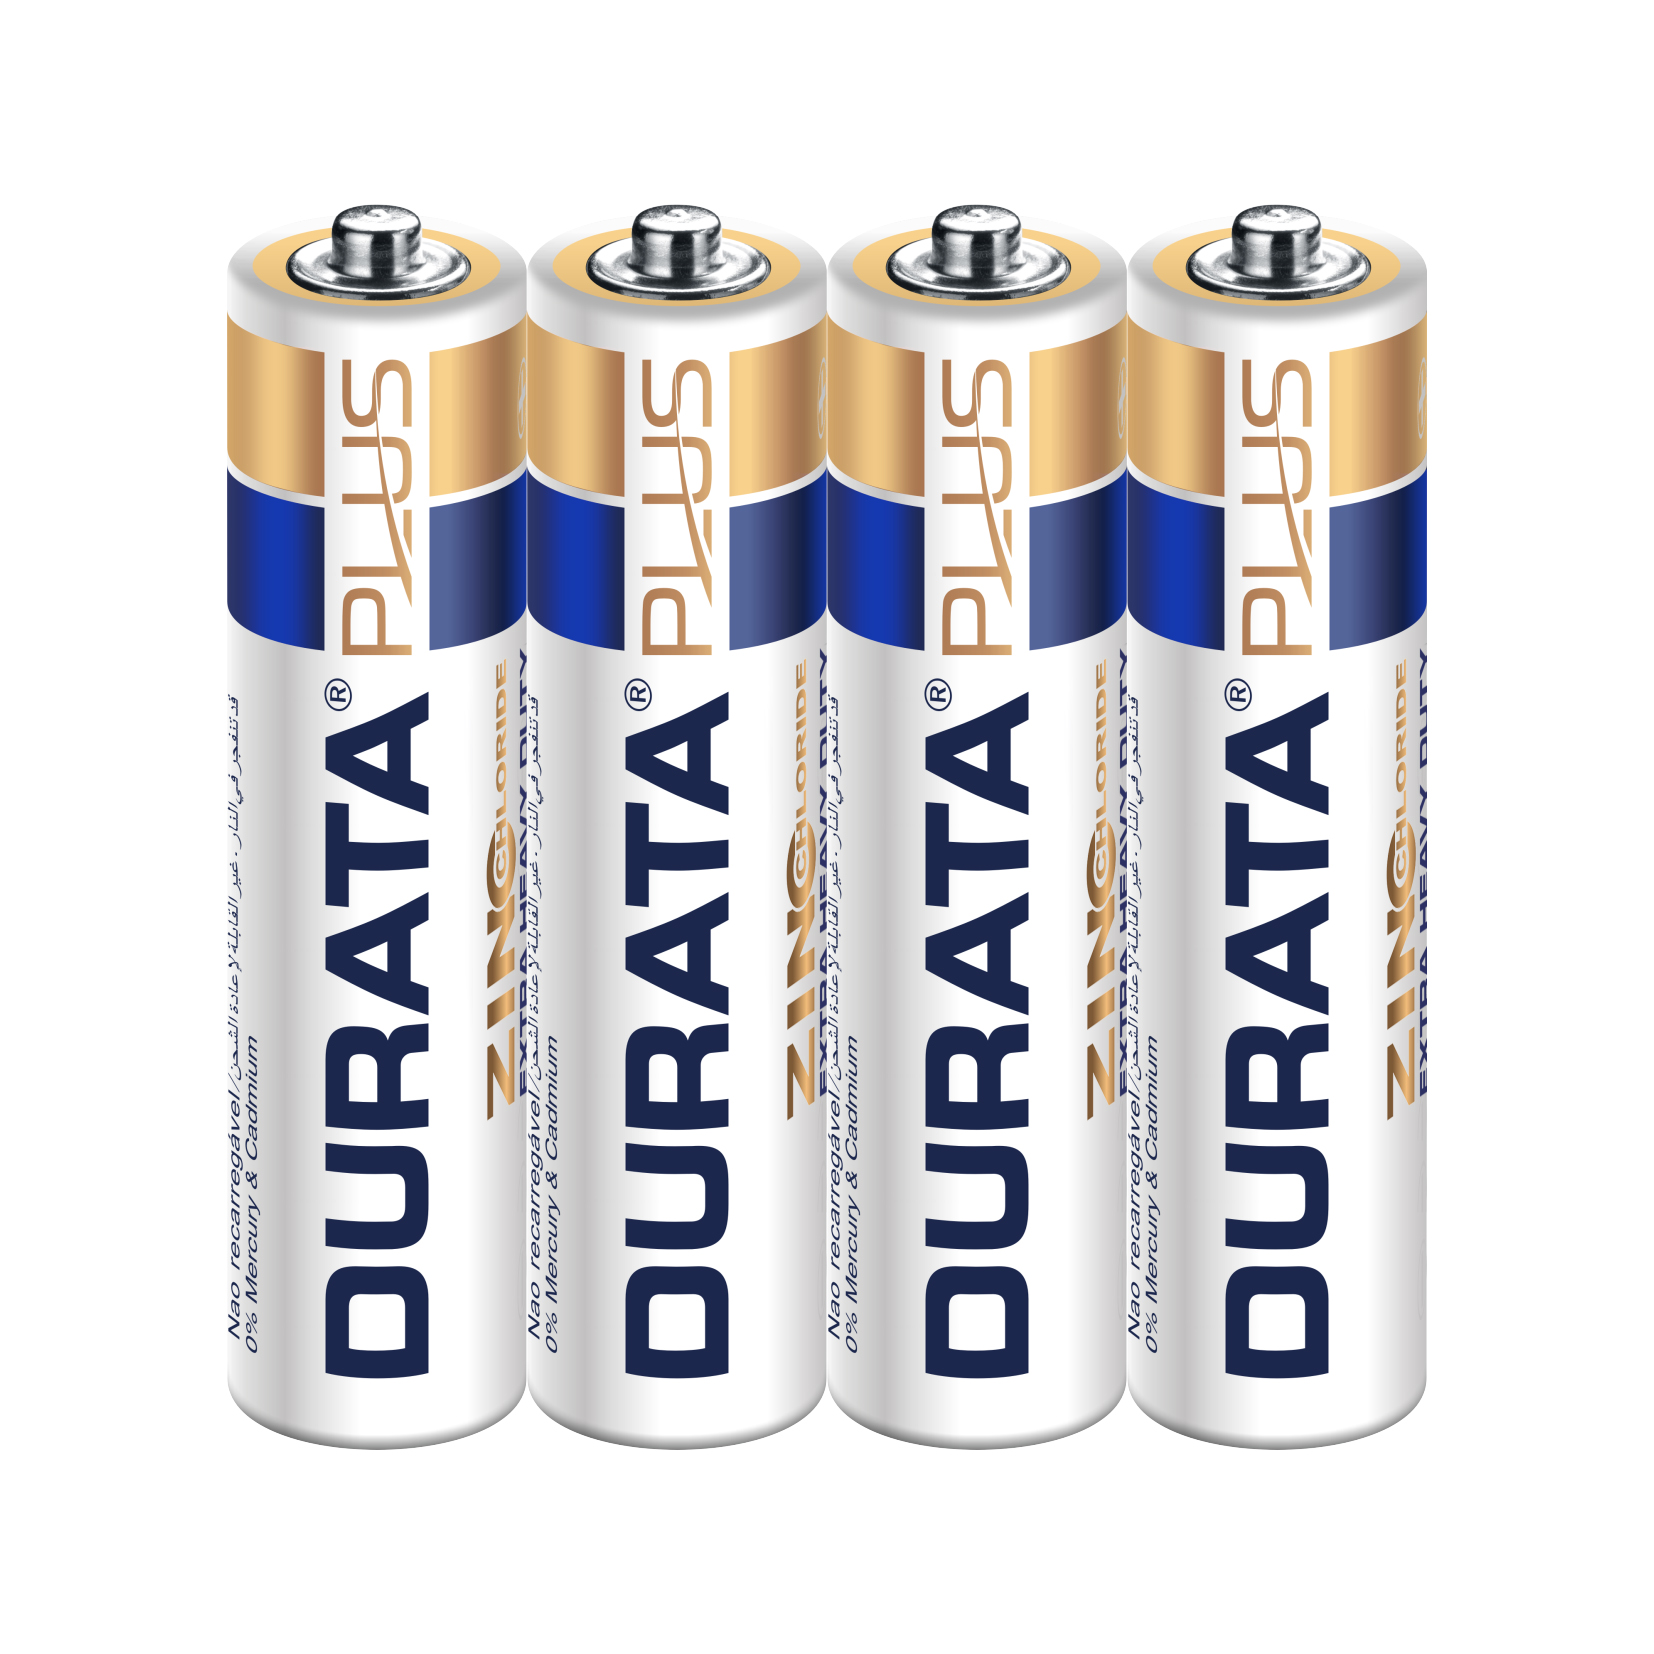 DURATA PLUS Size AAA - Shrink Pack 4 Batteries